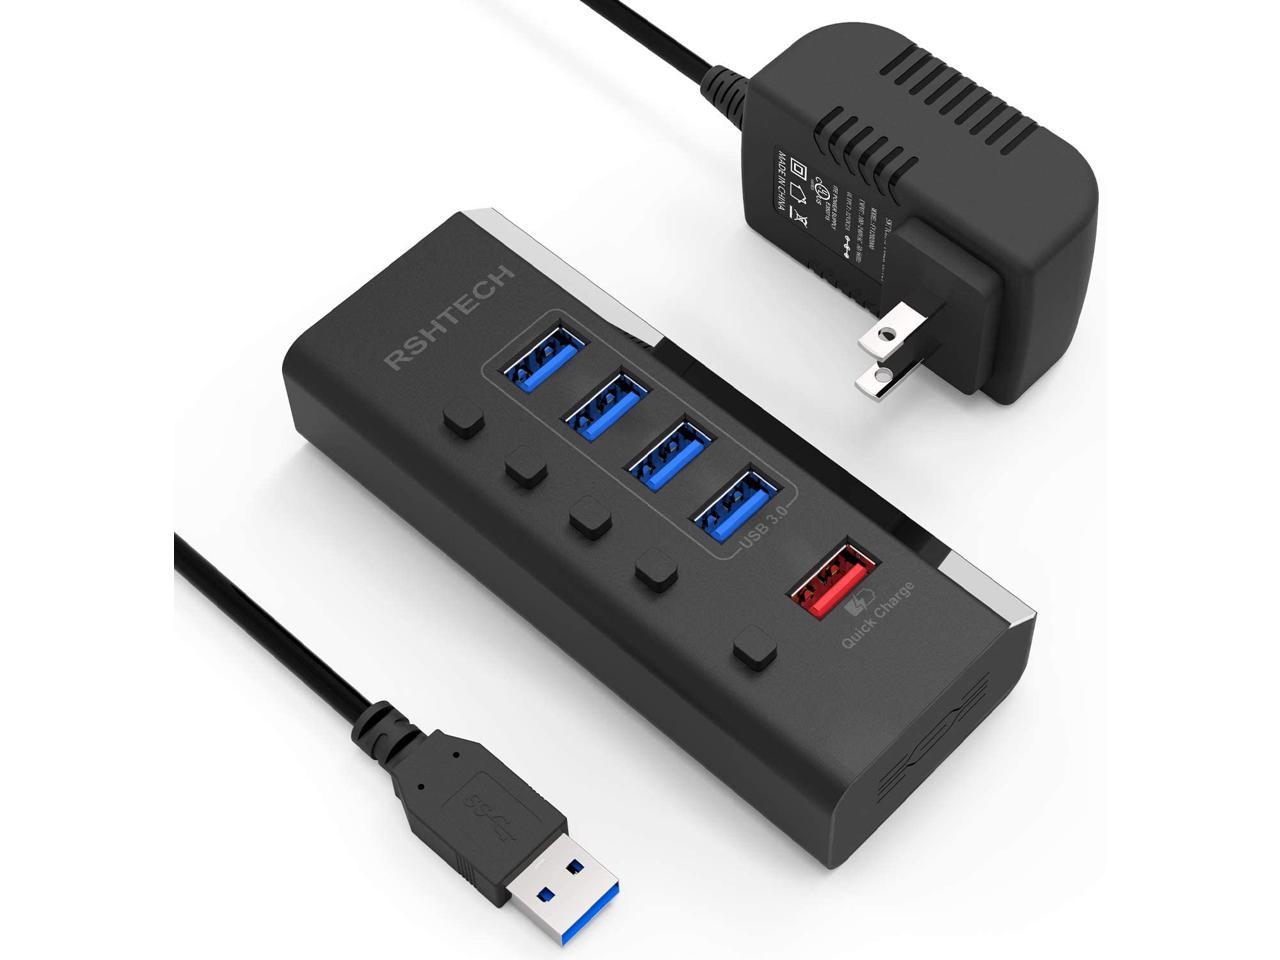 1 USB Fast Charging Port and Individual On/Off Switches RSHTECH USB 3 Hub with 4 USB 3.0 Data Ports A35-Black Powered USB Hub